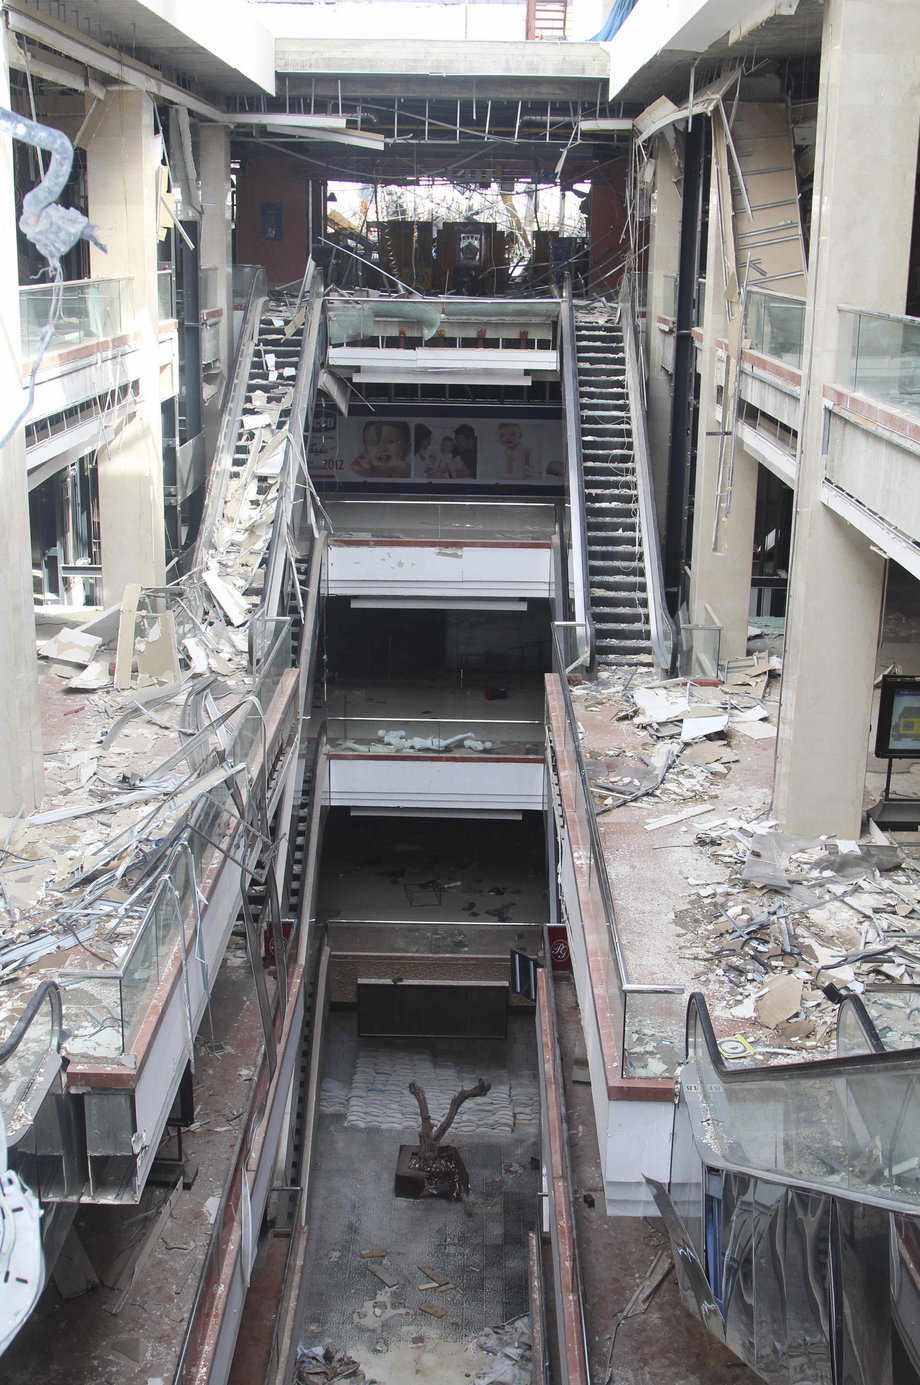 Damage inside Shahba Mall, one of the largest commercial shopping centers in Syria, which was targeted by what activists said were airstrikes by forces loyal to Assad, in 2014.